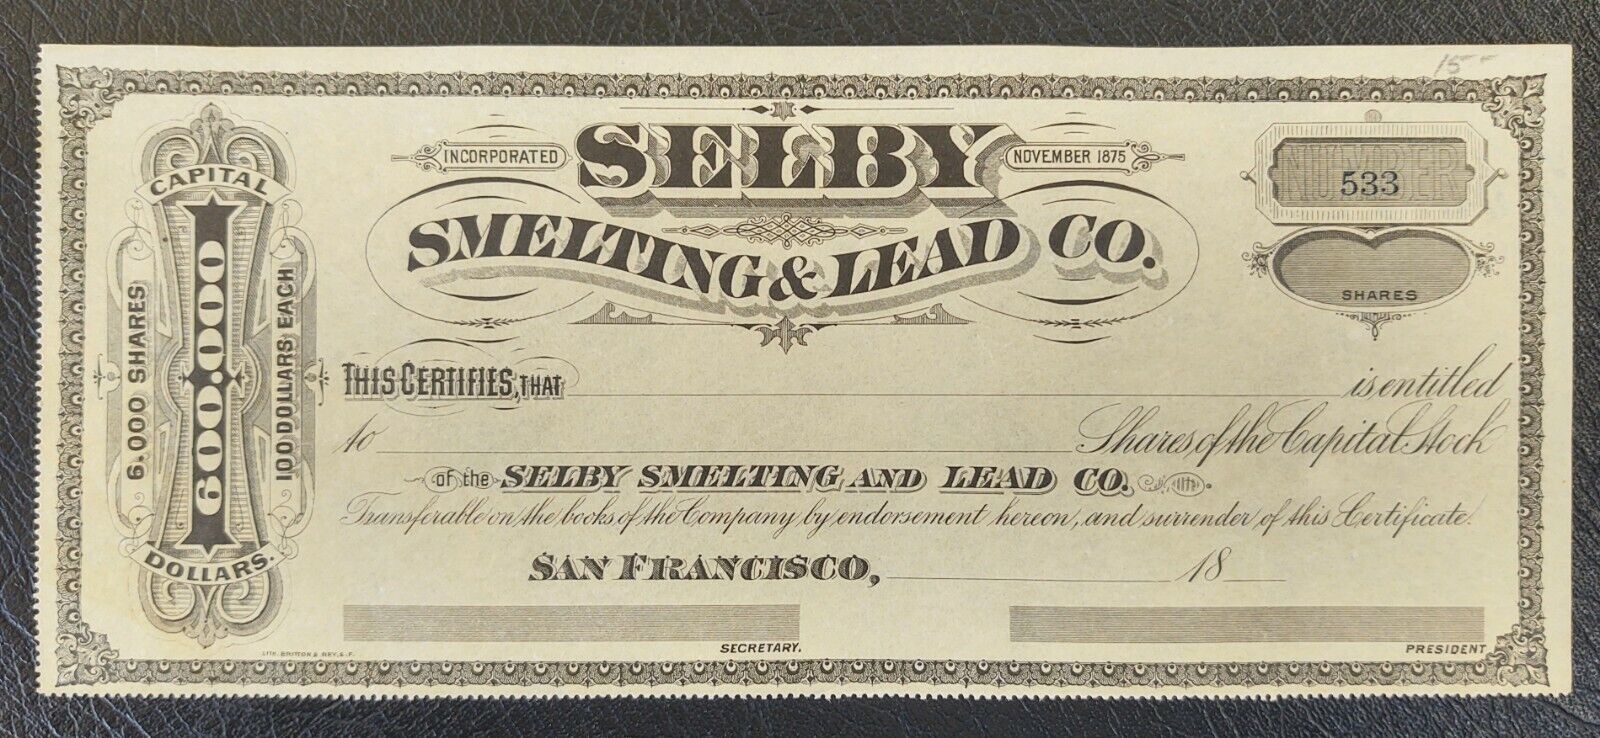 1875-1899 Selby Smelting & Lead Co. Stock Certificate San Francisco